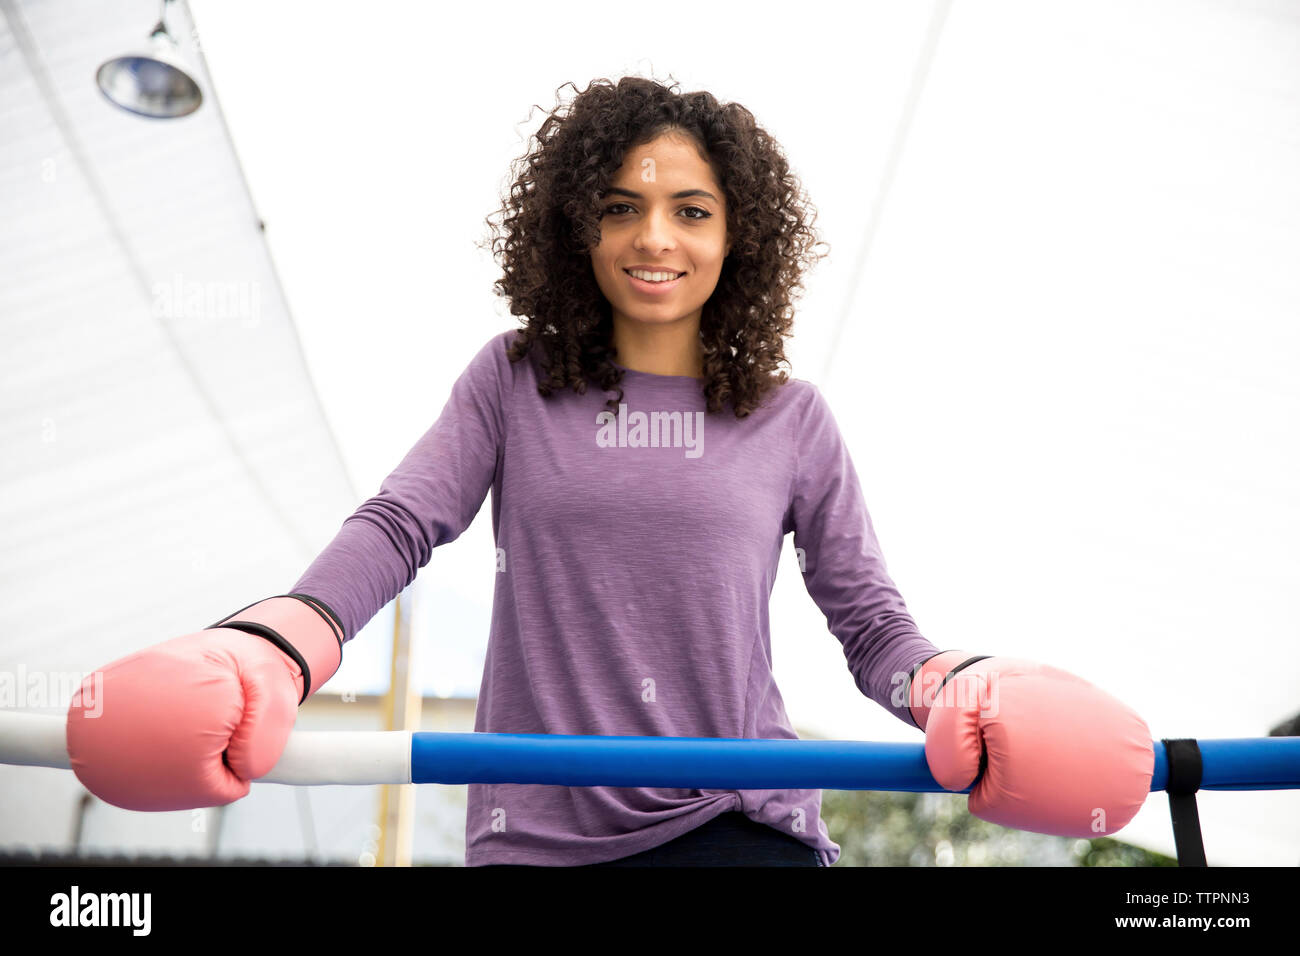 Portrait of smiling female boxer standing in boxing ring Stock Photo